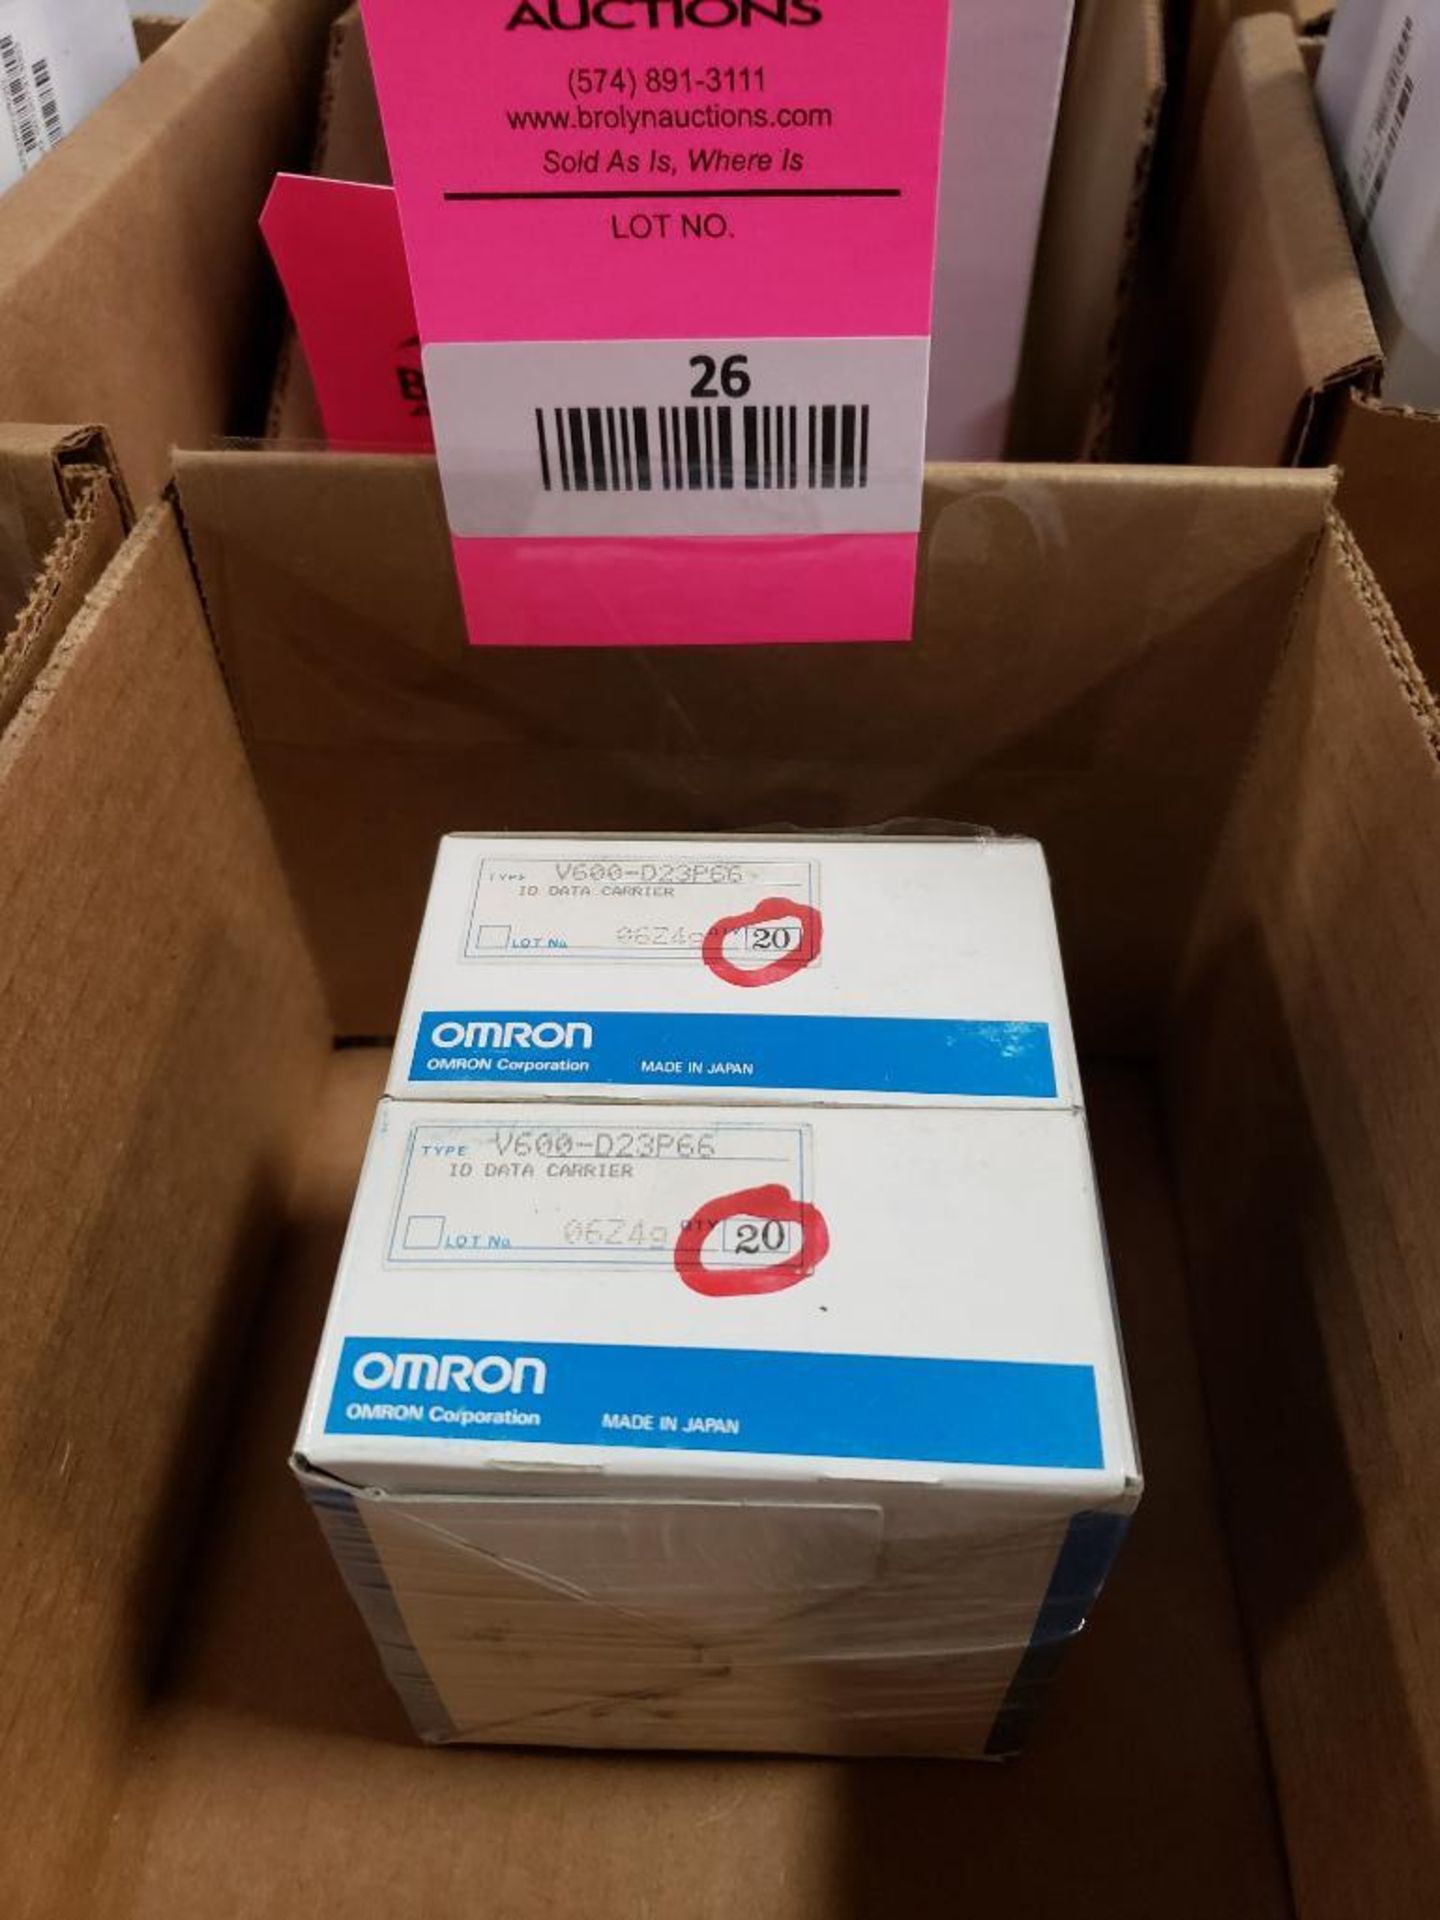 Qty 40 PC - Omron V600-D23P66 ID data carrier. (2) 20Ct boxes. New in box.